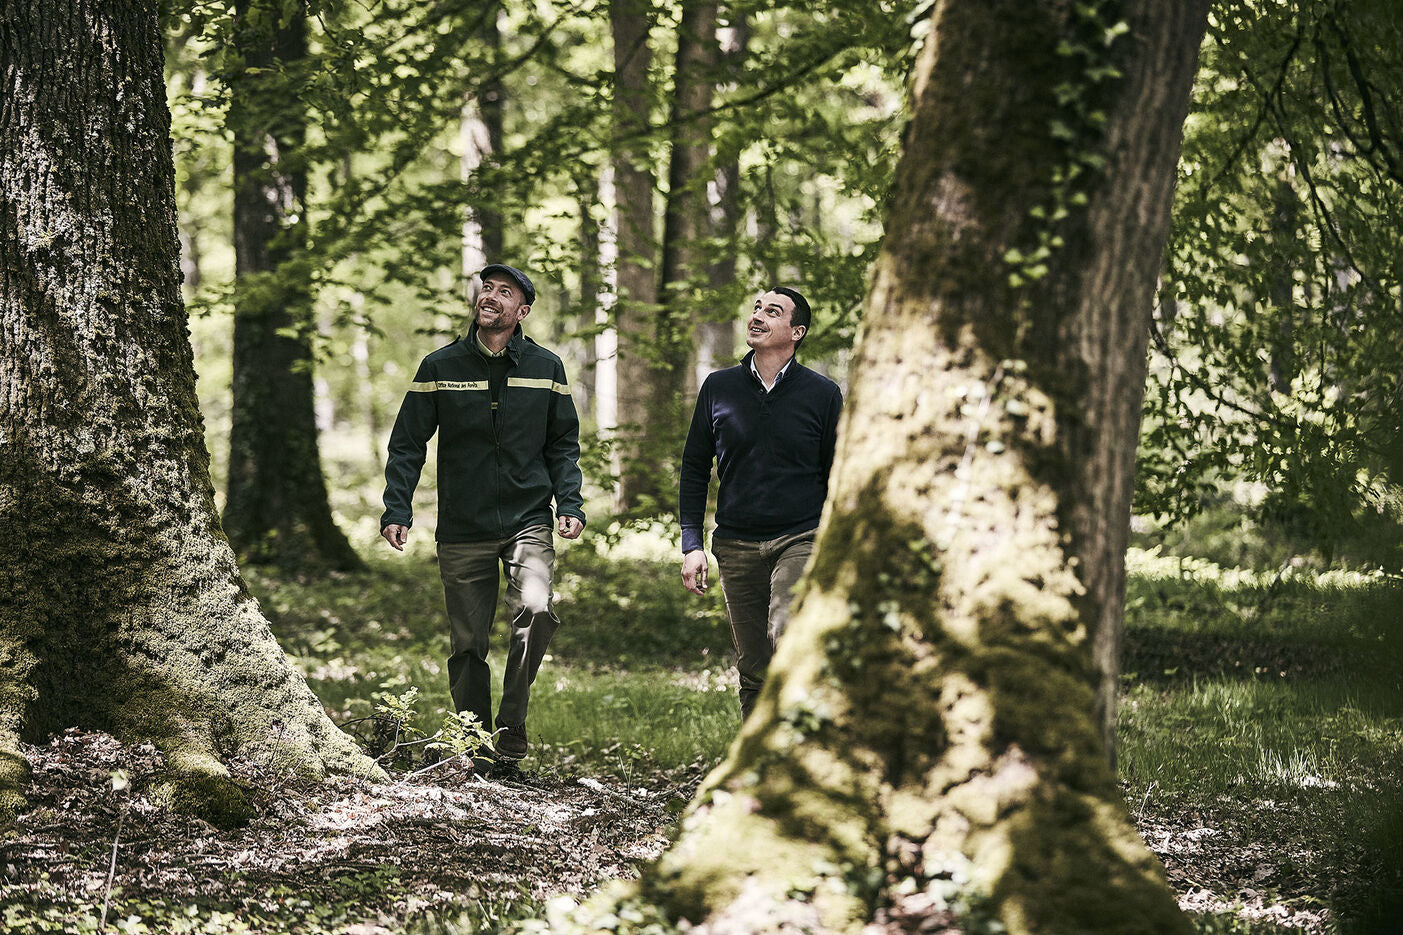 A lifestyle photo of two men walking in a sunny forest